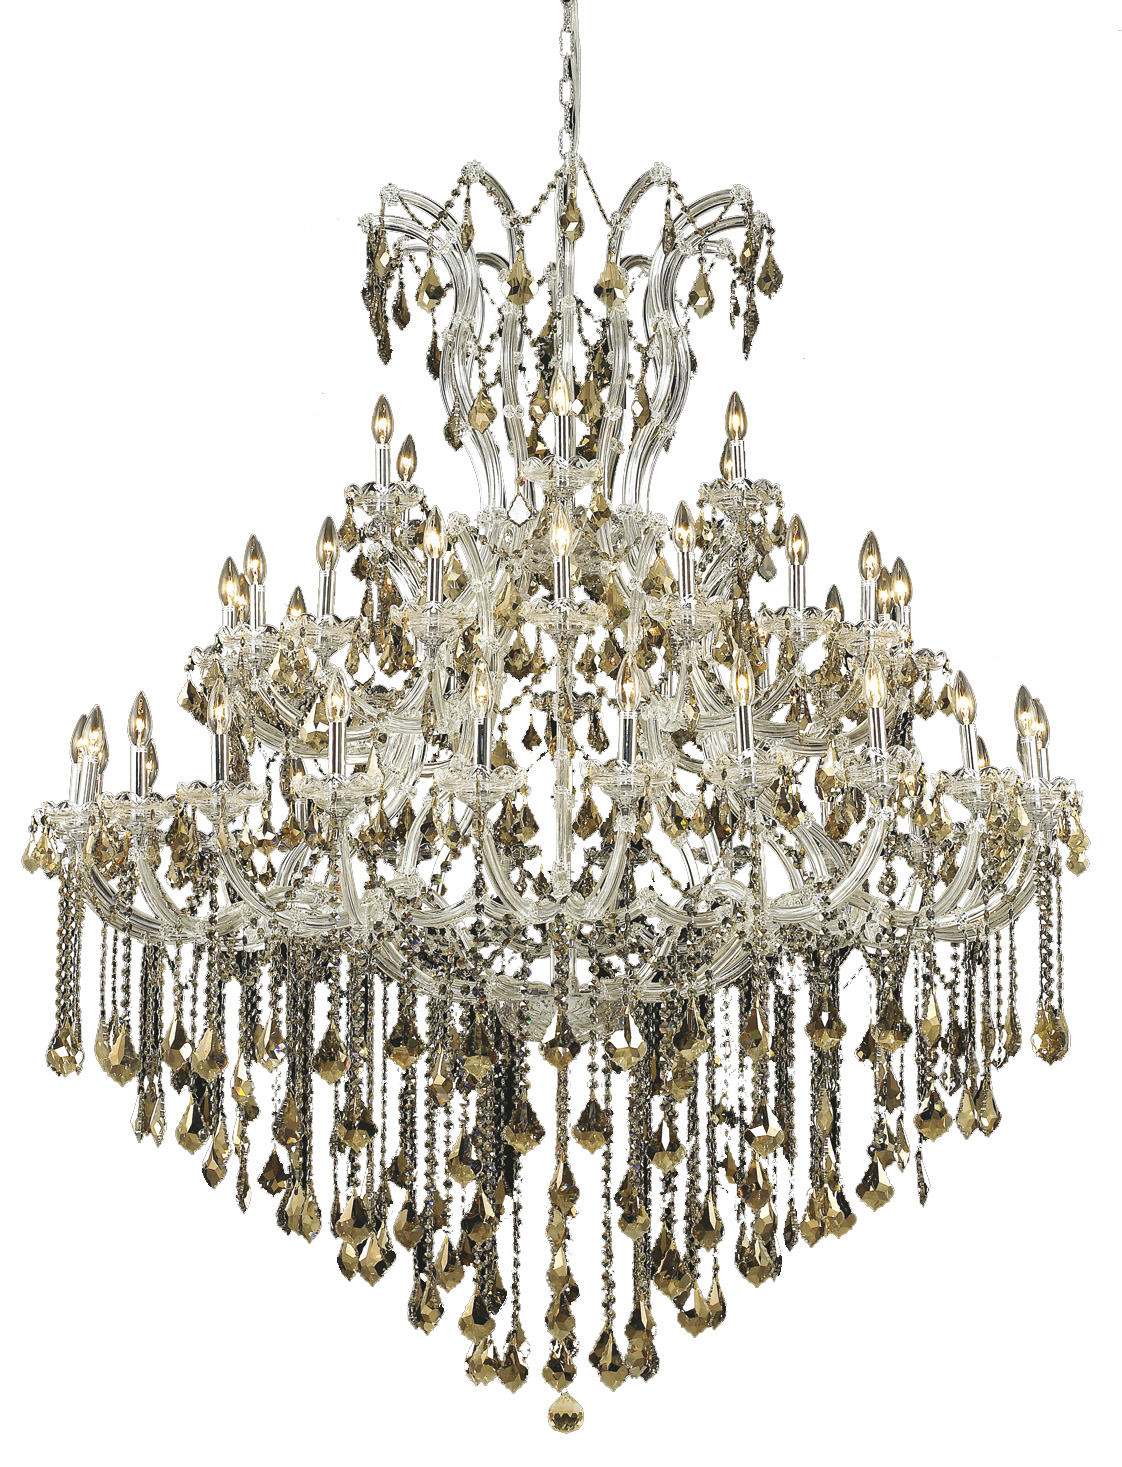 Elegant Lighting 2800 Maria Theresa Collection Chandelier D:60in H:72in Lt:49 Chrome Finish (Royal Cut Crystals)